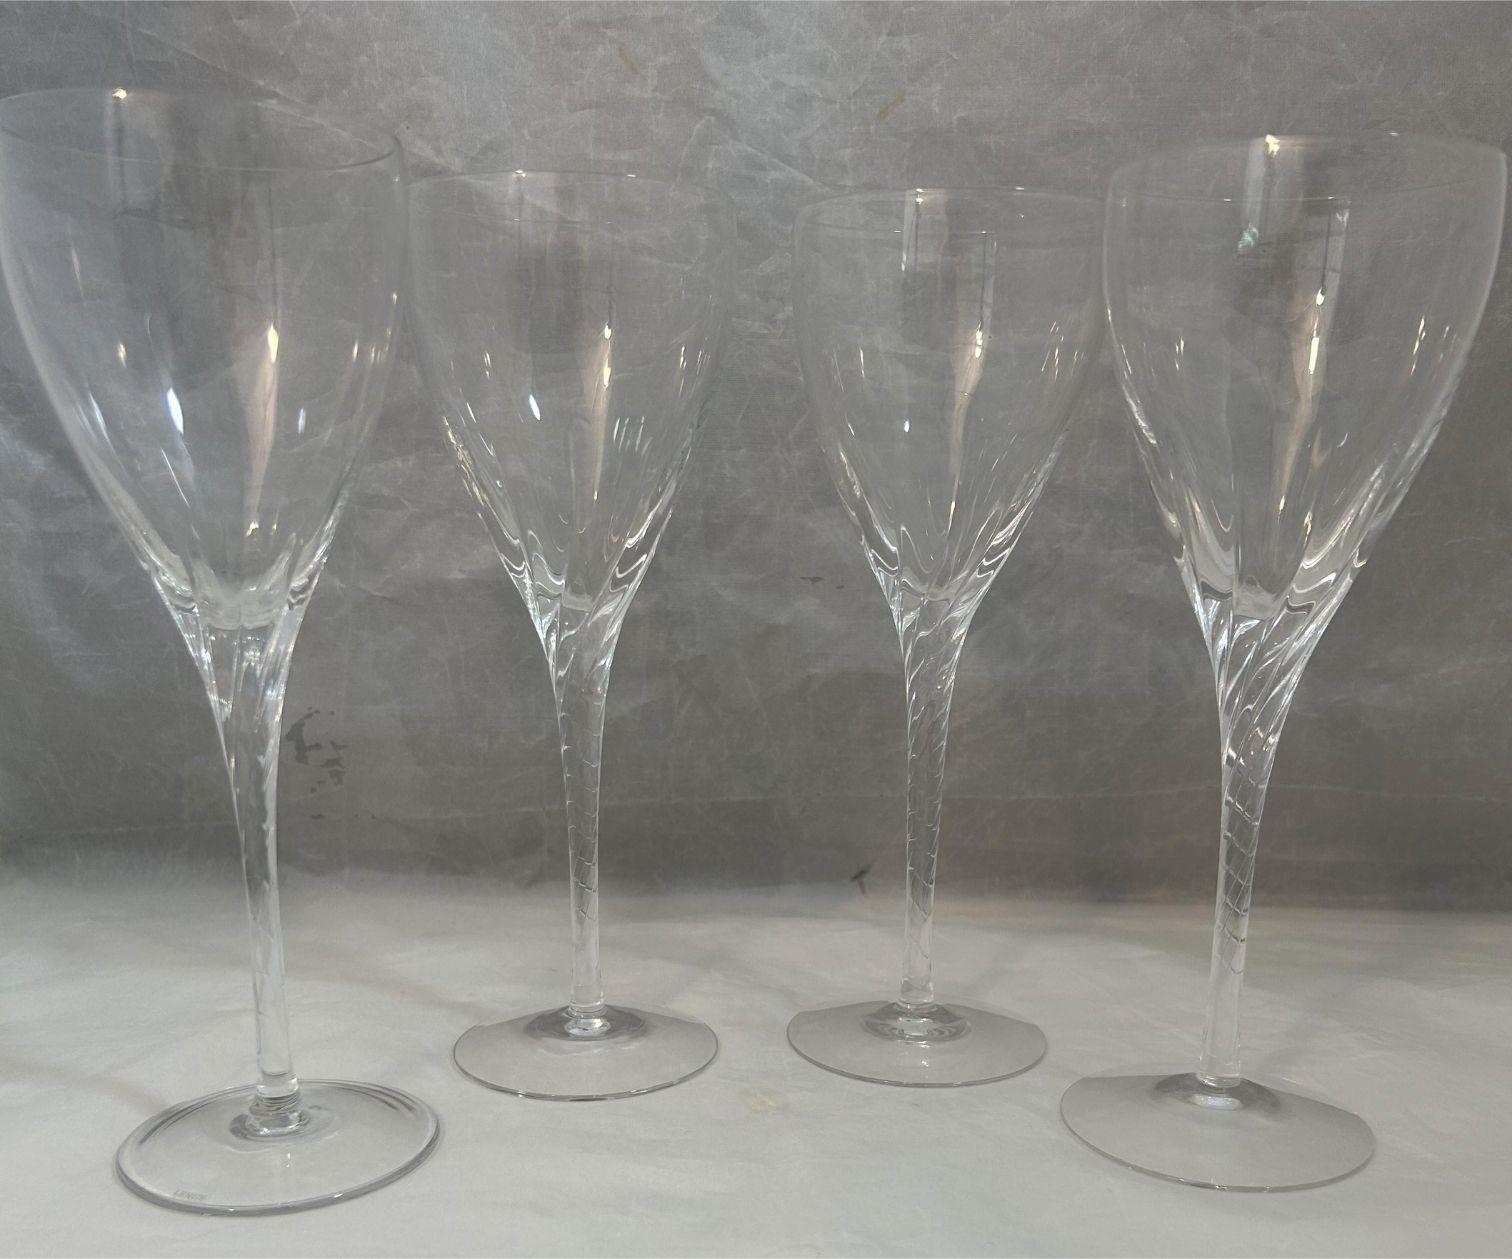 Where Is Lenox Crystal Stemware Manufactured?